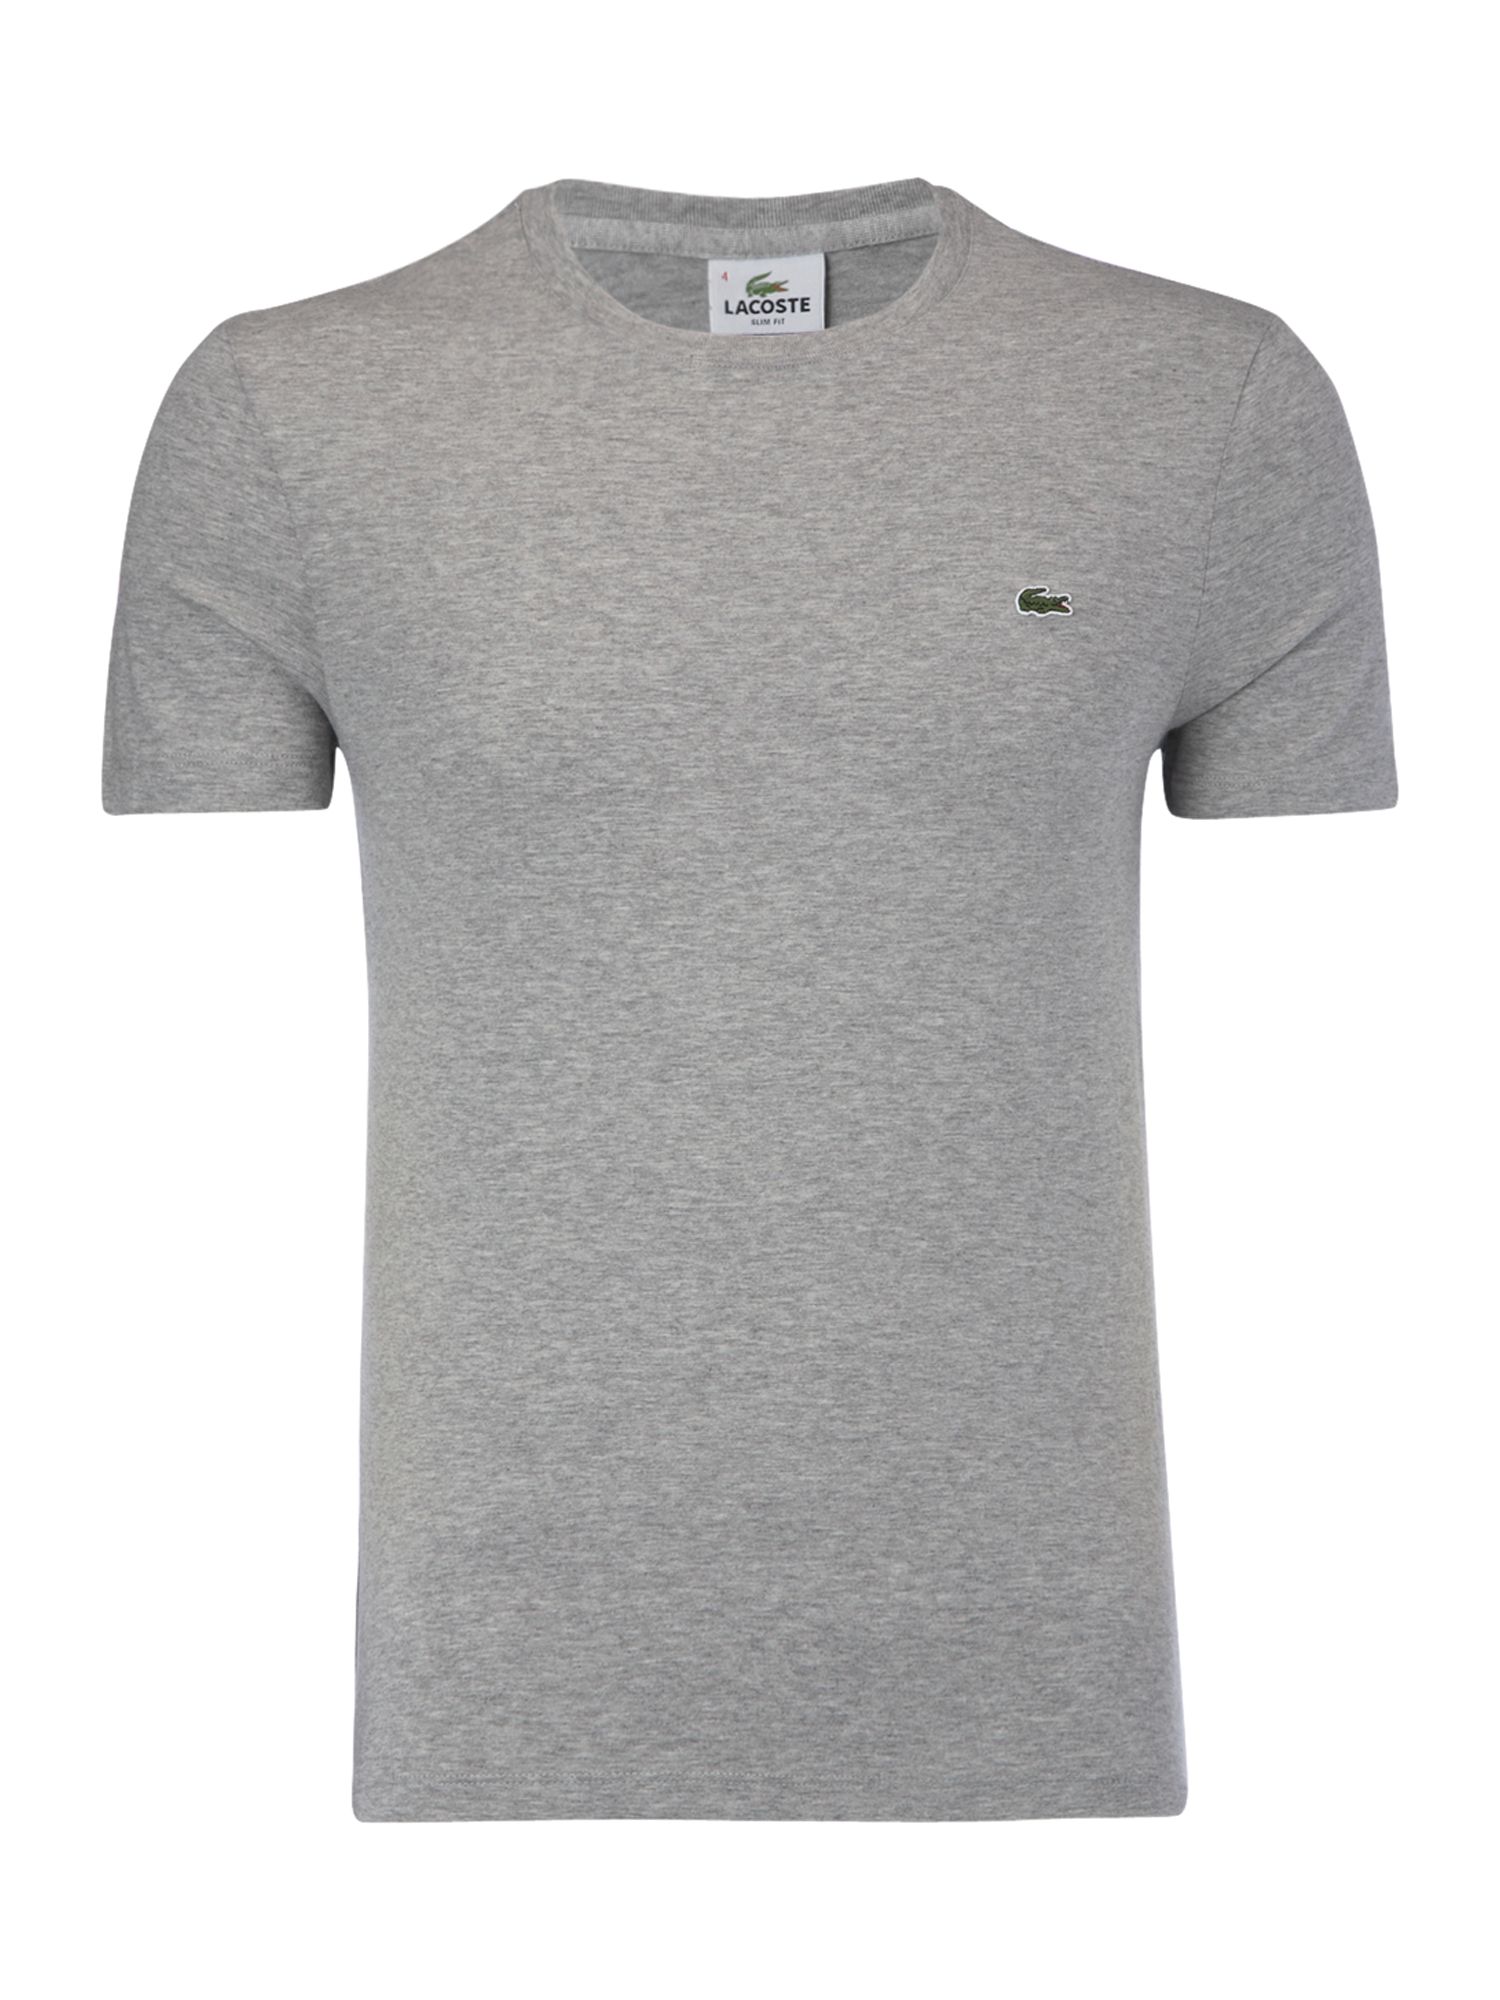 Lacoste Short Sleeve Crew T-Shirt in Grey - INTOTO7 Menswear